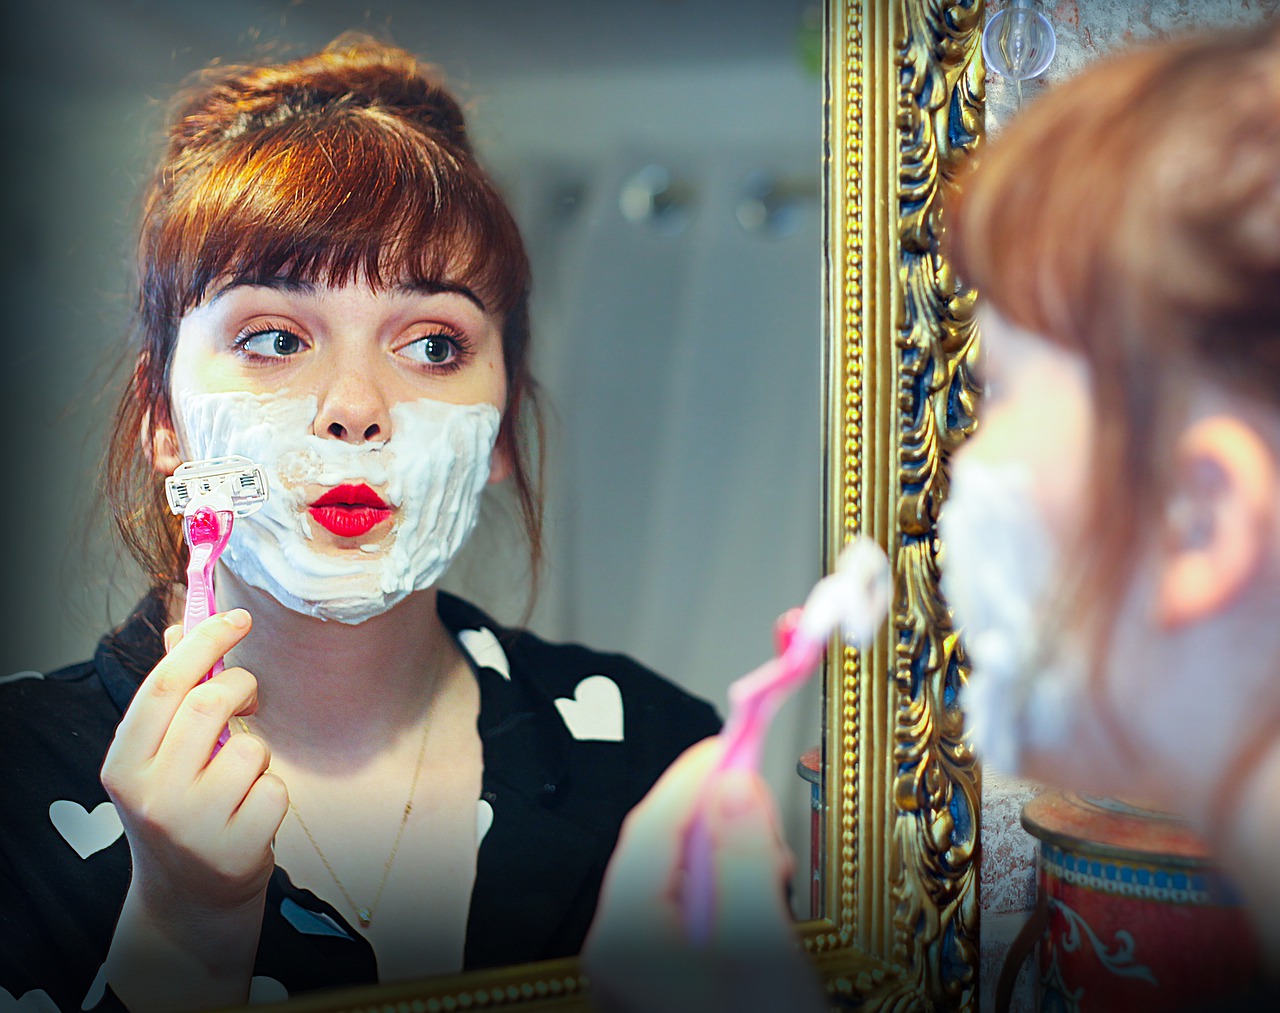 White-appearing person with red hair looking in the mirror. The person is shaving her face with a pink razor.